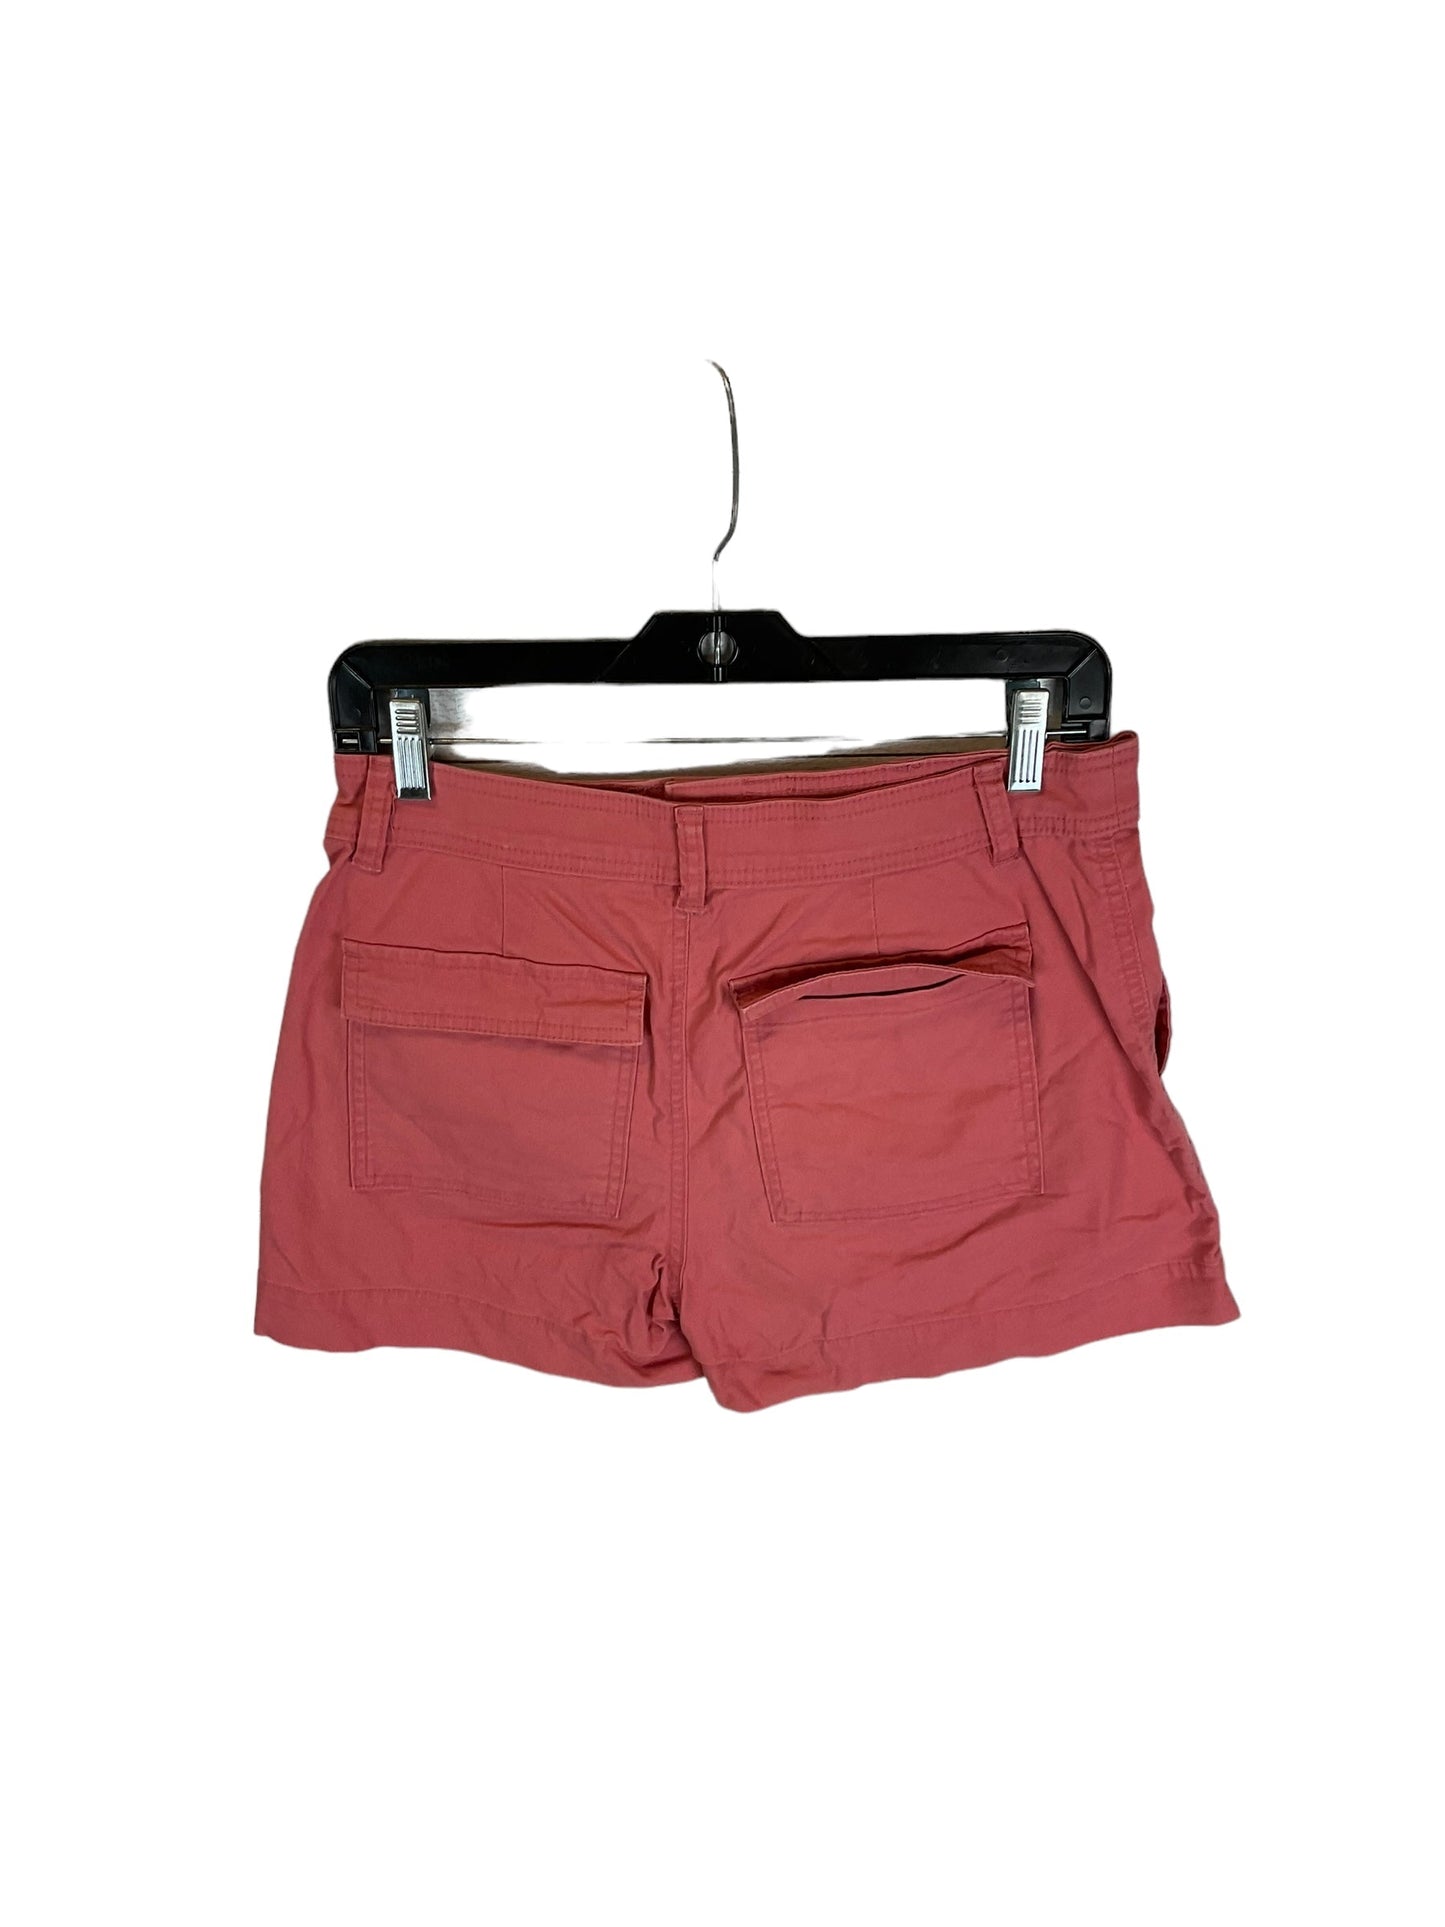 Shorts By A New Day  Size: 4